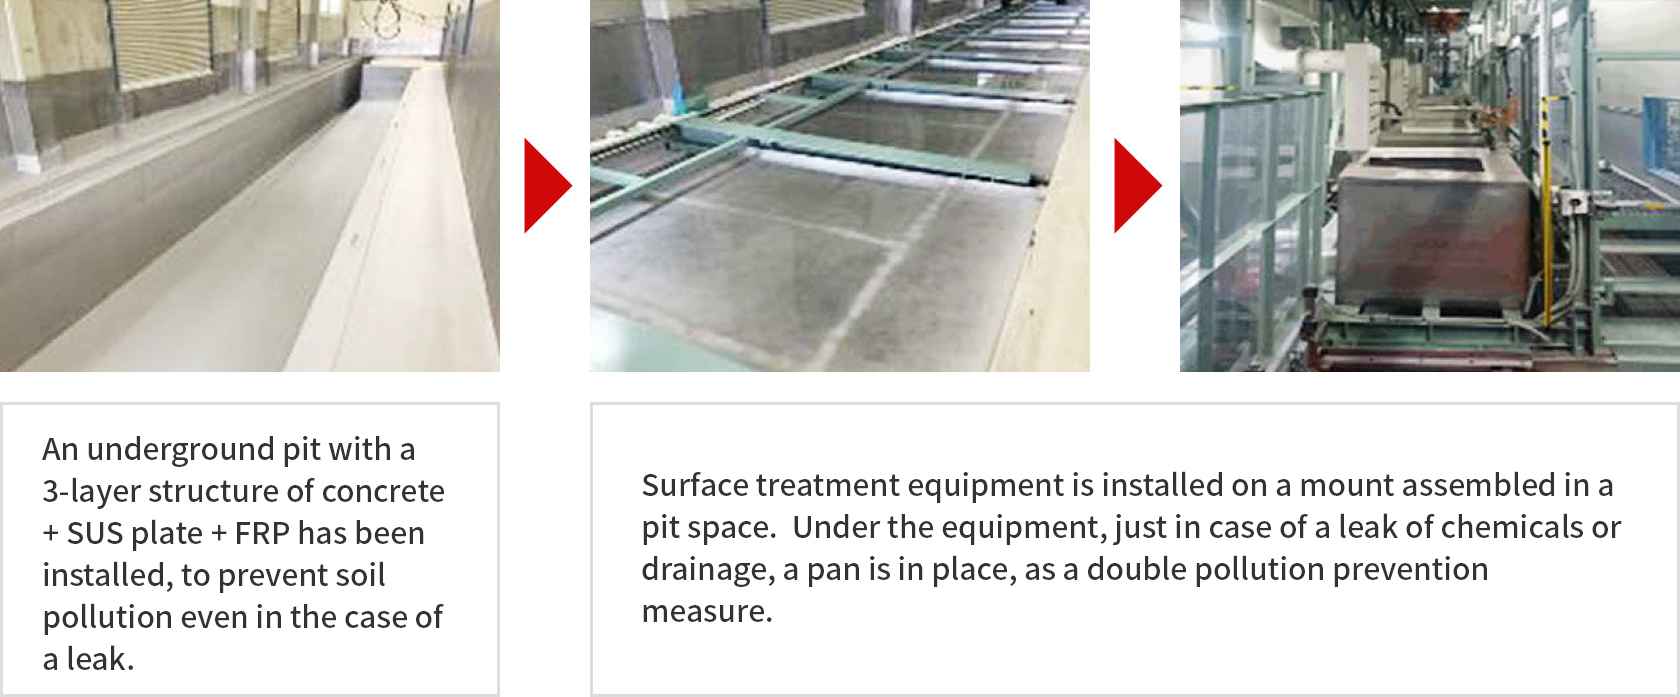 Example of surface treatment equipment improvement